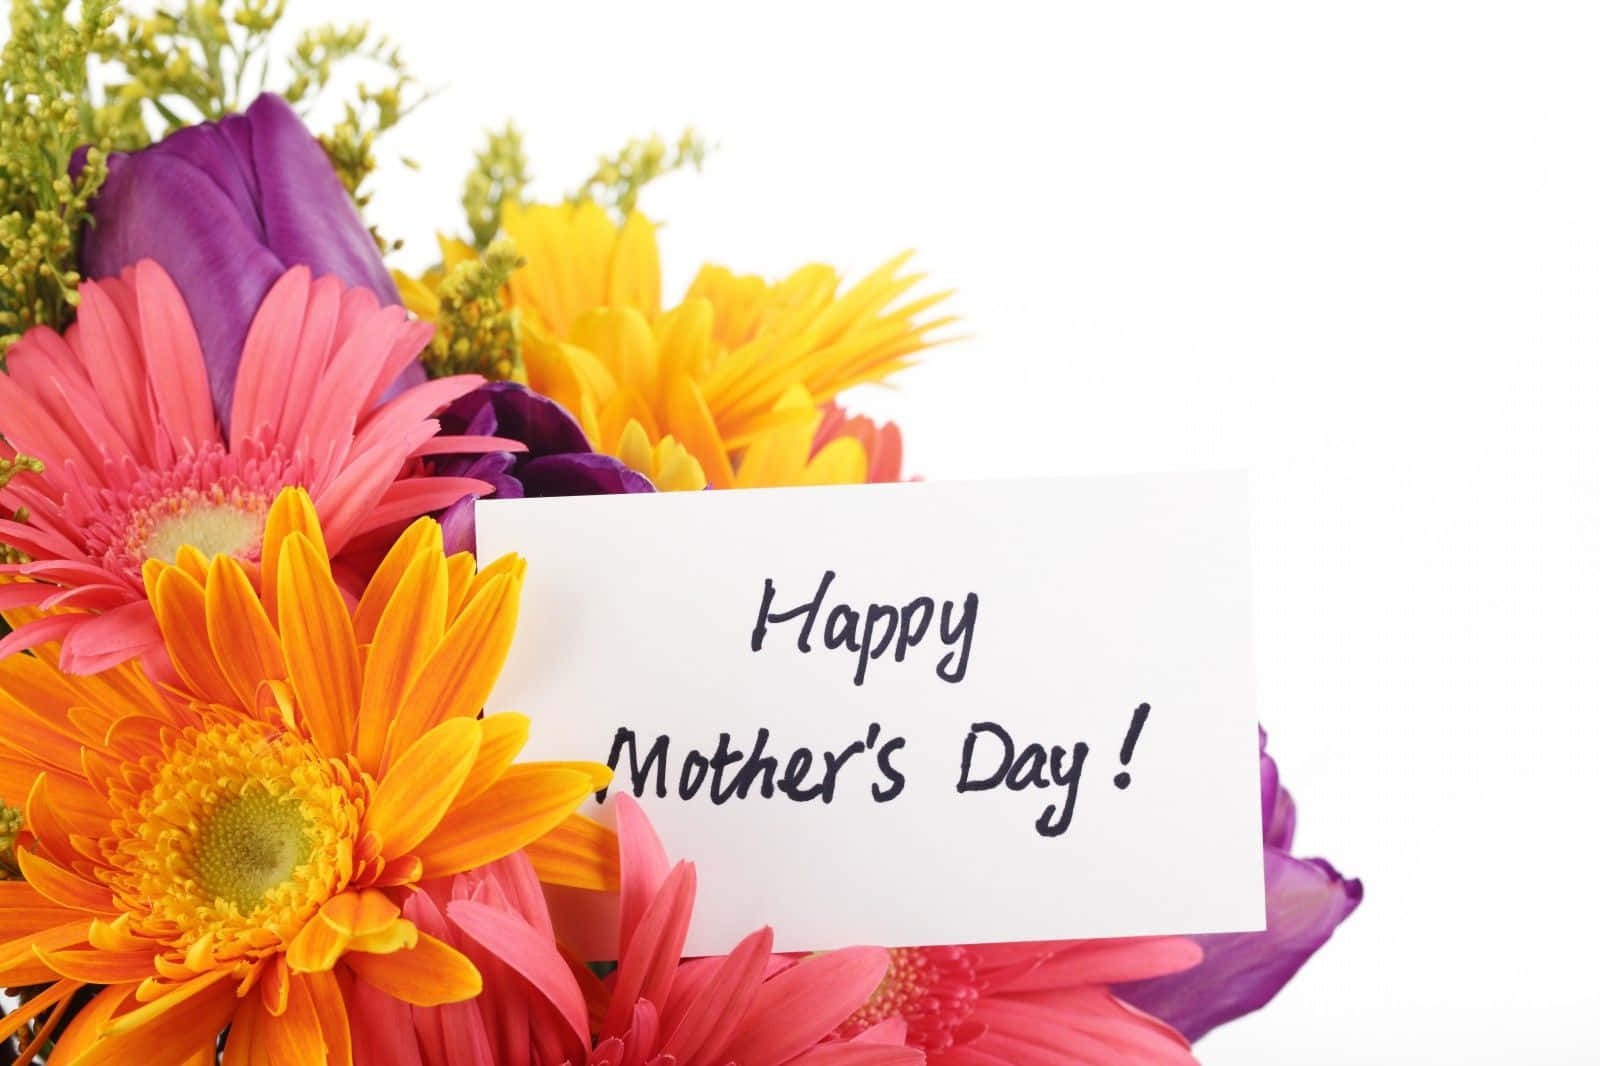 A Bouquet Of Flowers With A Happy Mother's Day Card